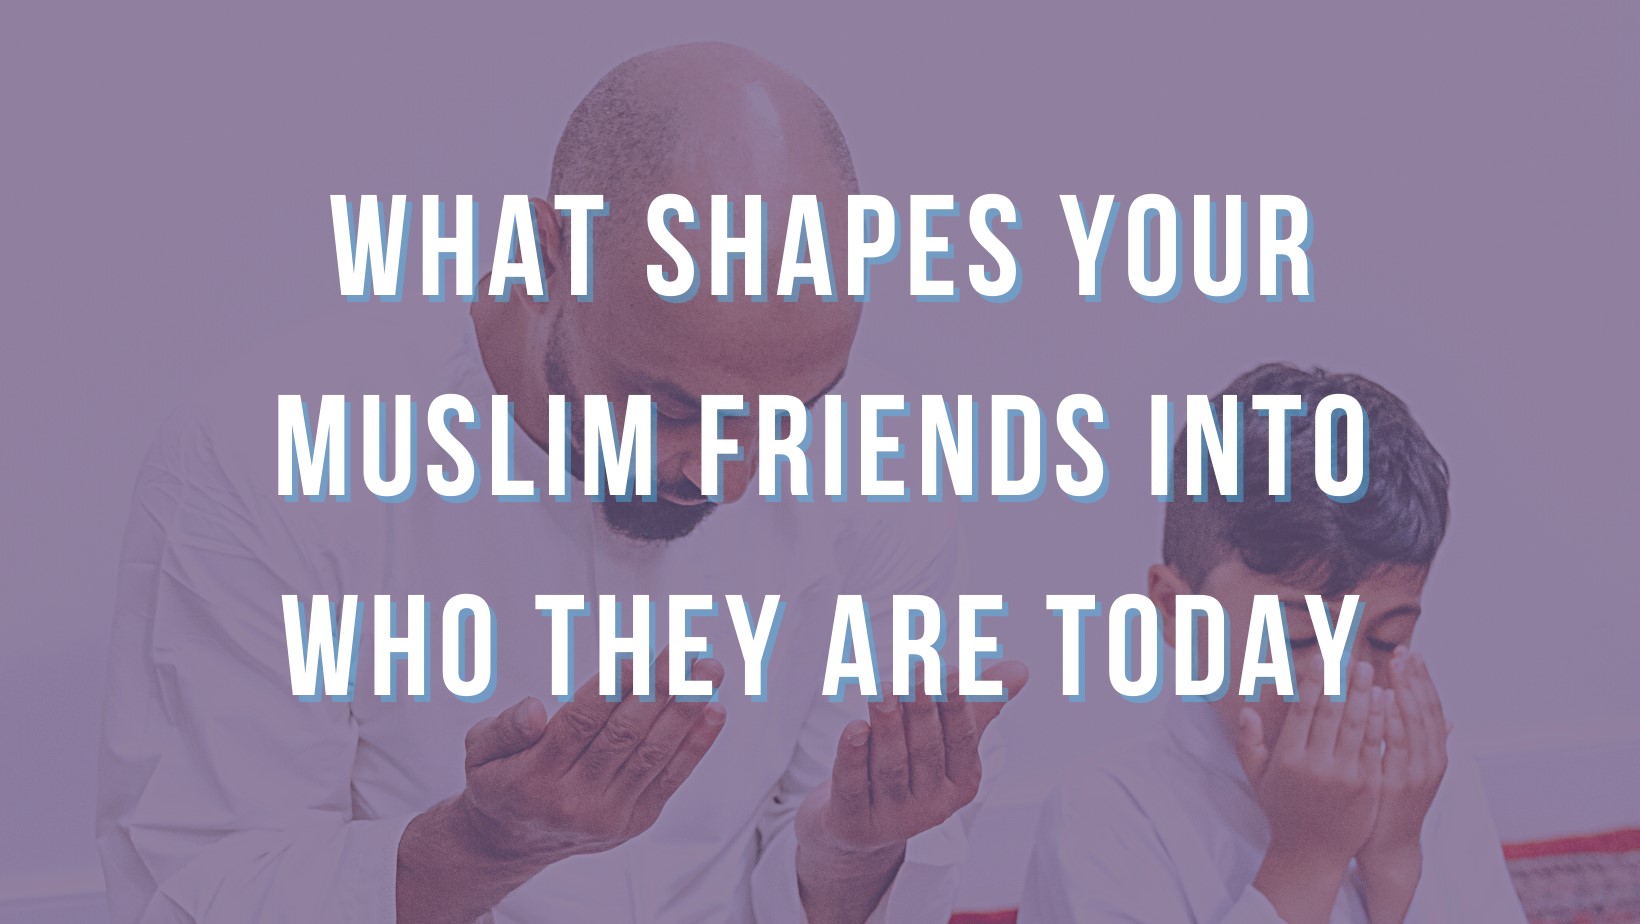 What Shapes your Muslim friends into who they are today